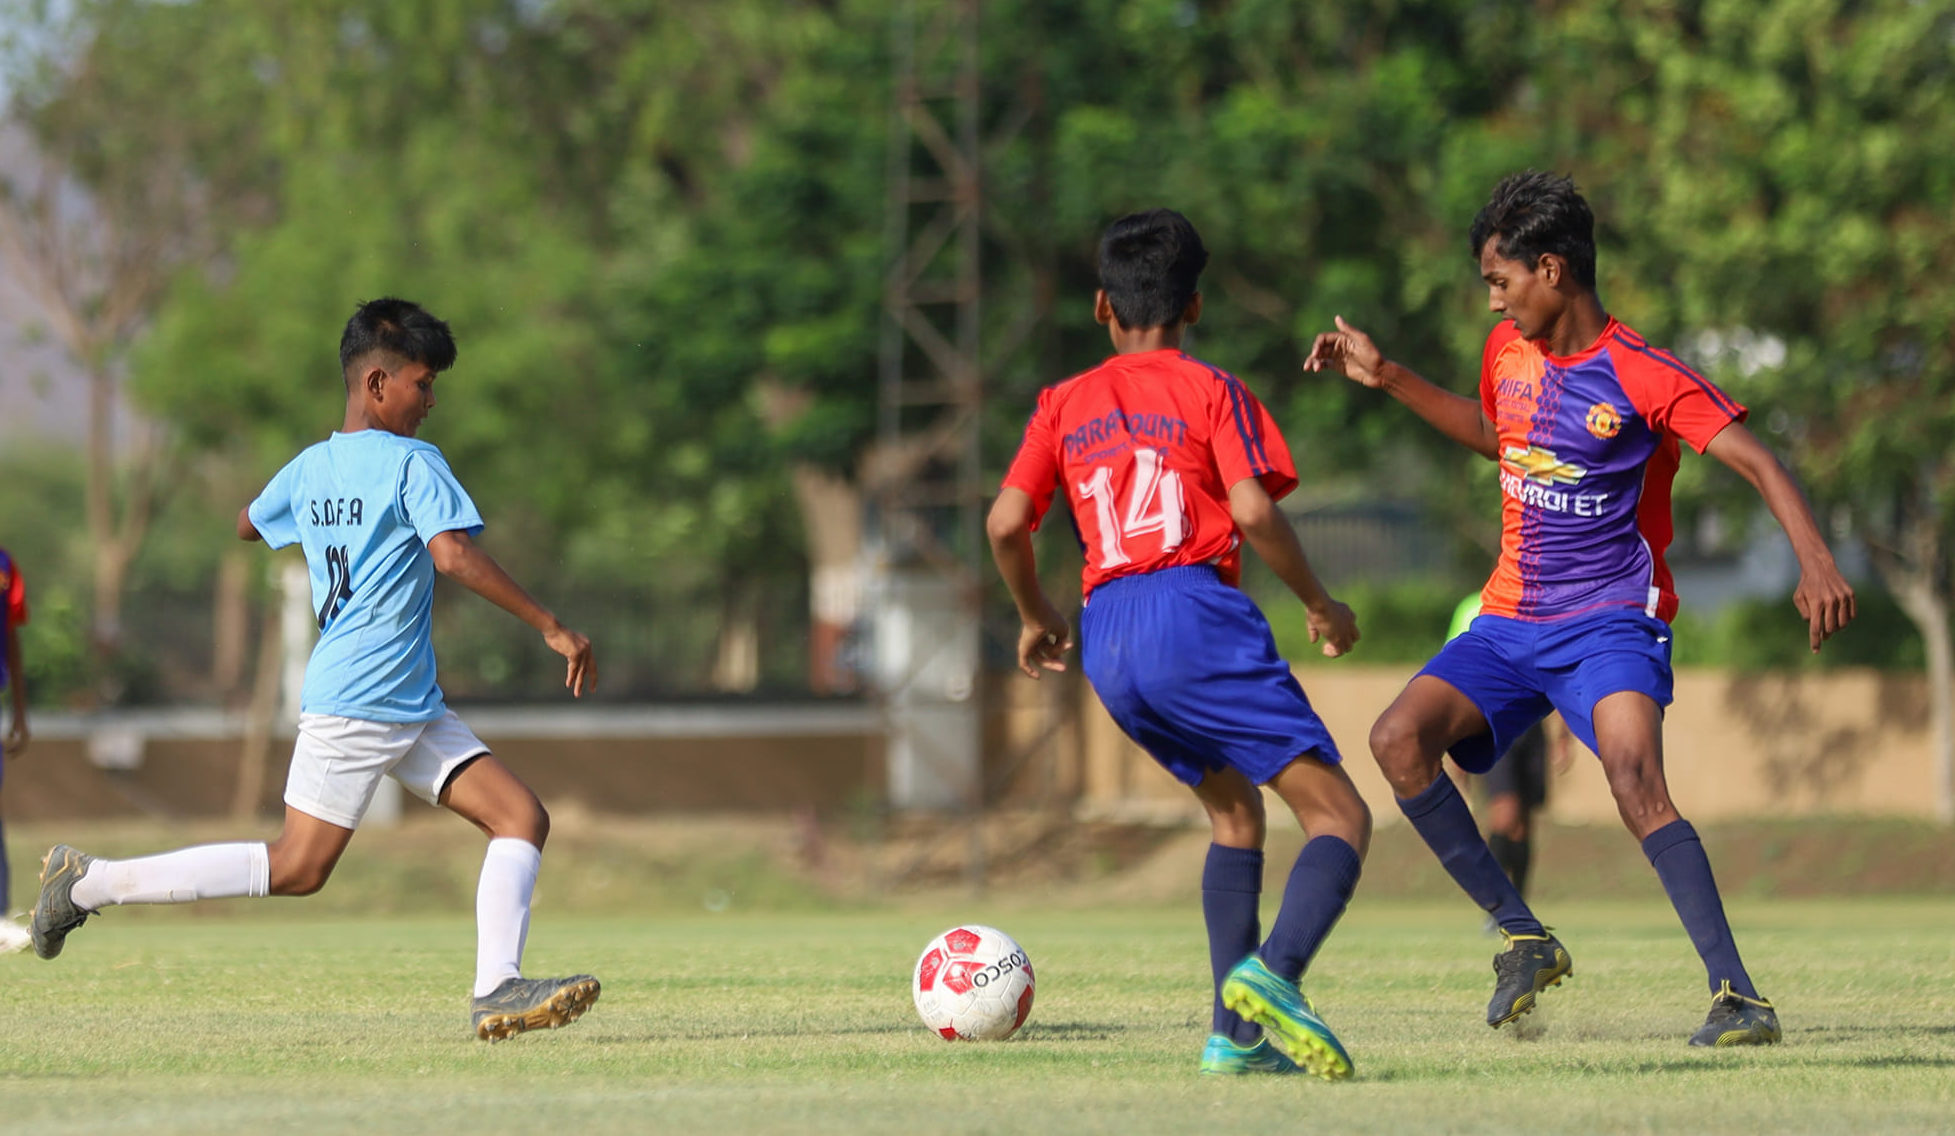 Exciting Matches and Stellar Performances Highlight Day 3 of WIFA Inter-District Championship